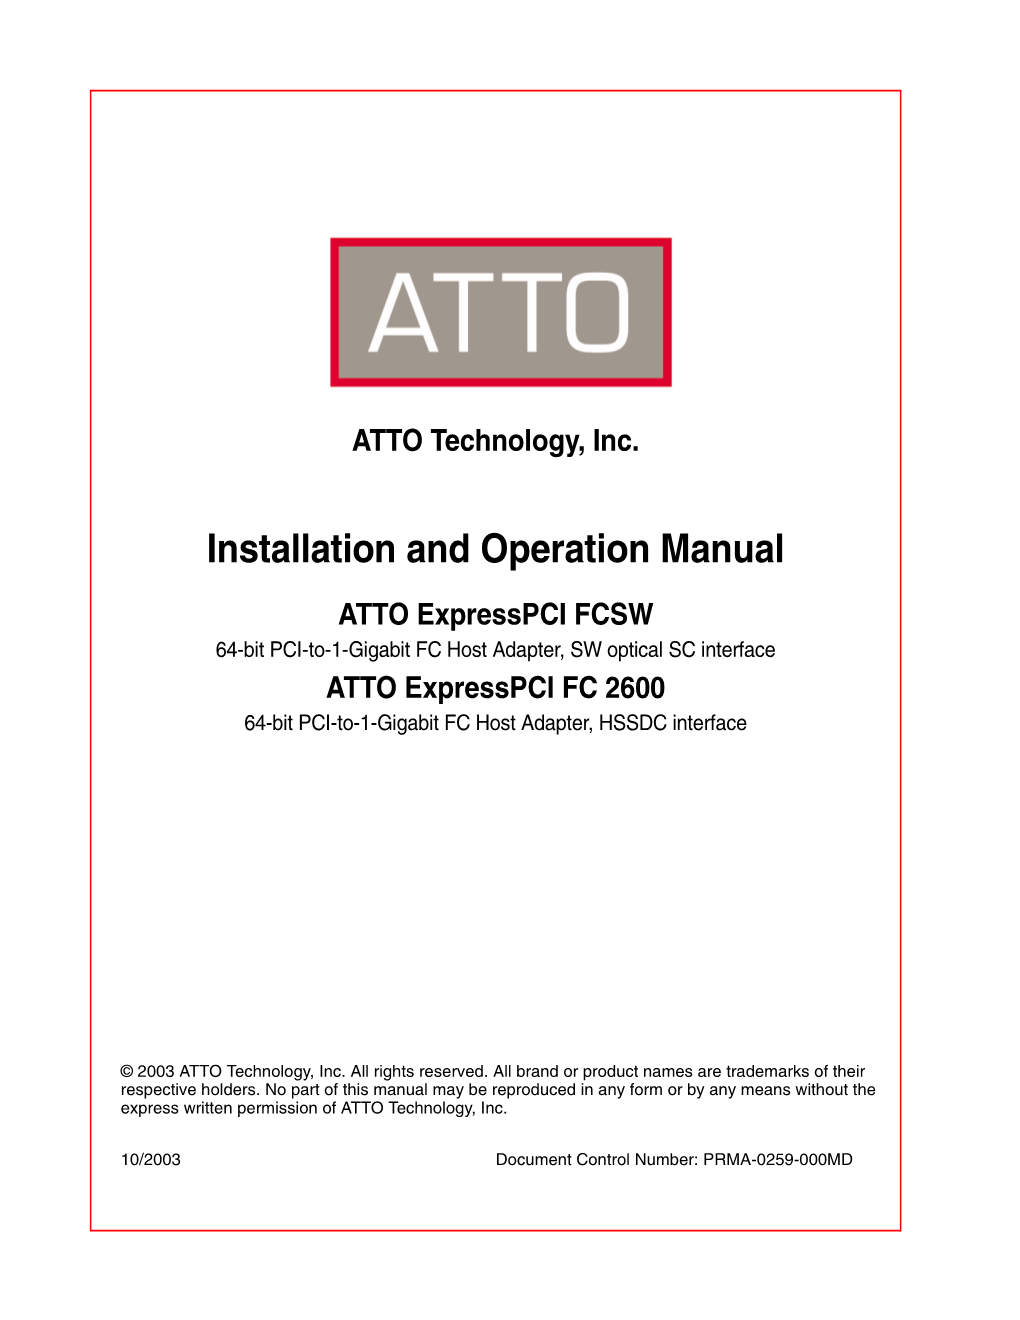 ATTO Technology, Inc. Installation and Operation Manual ATTO